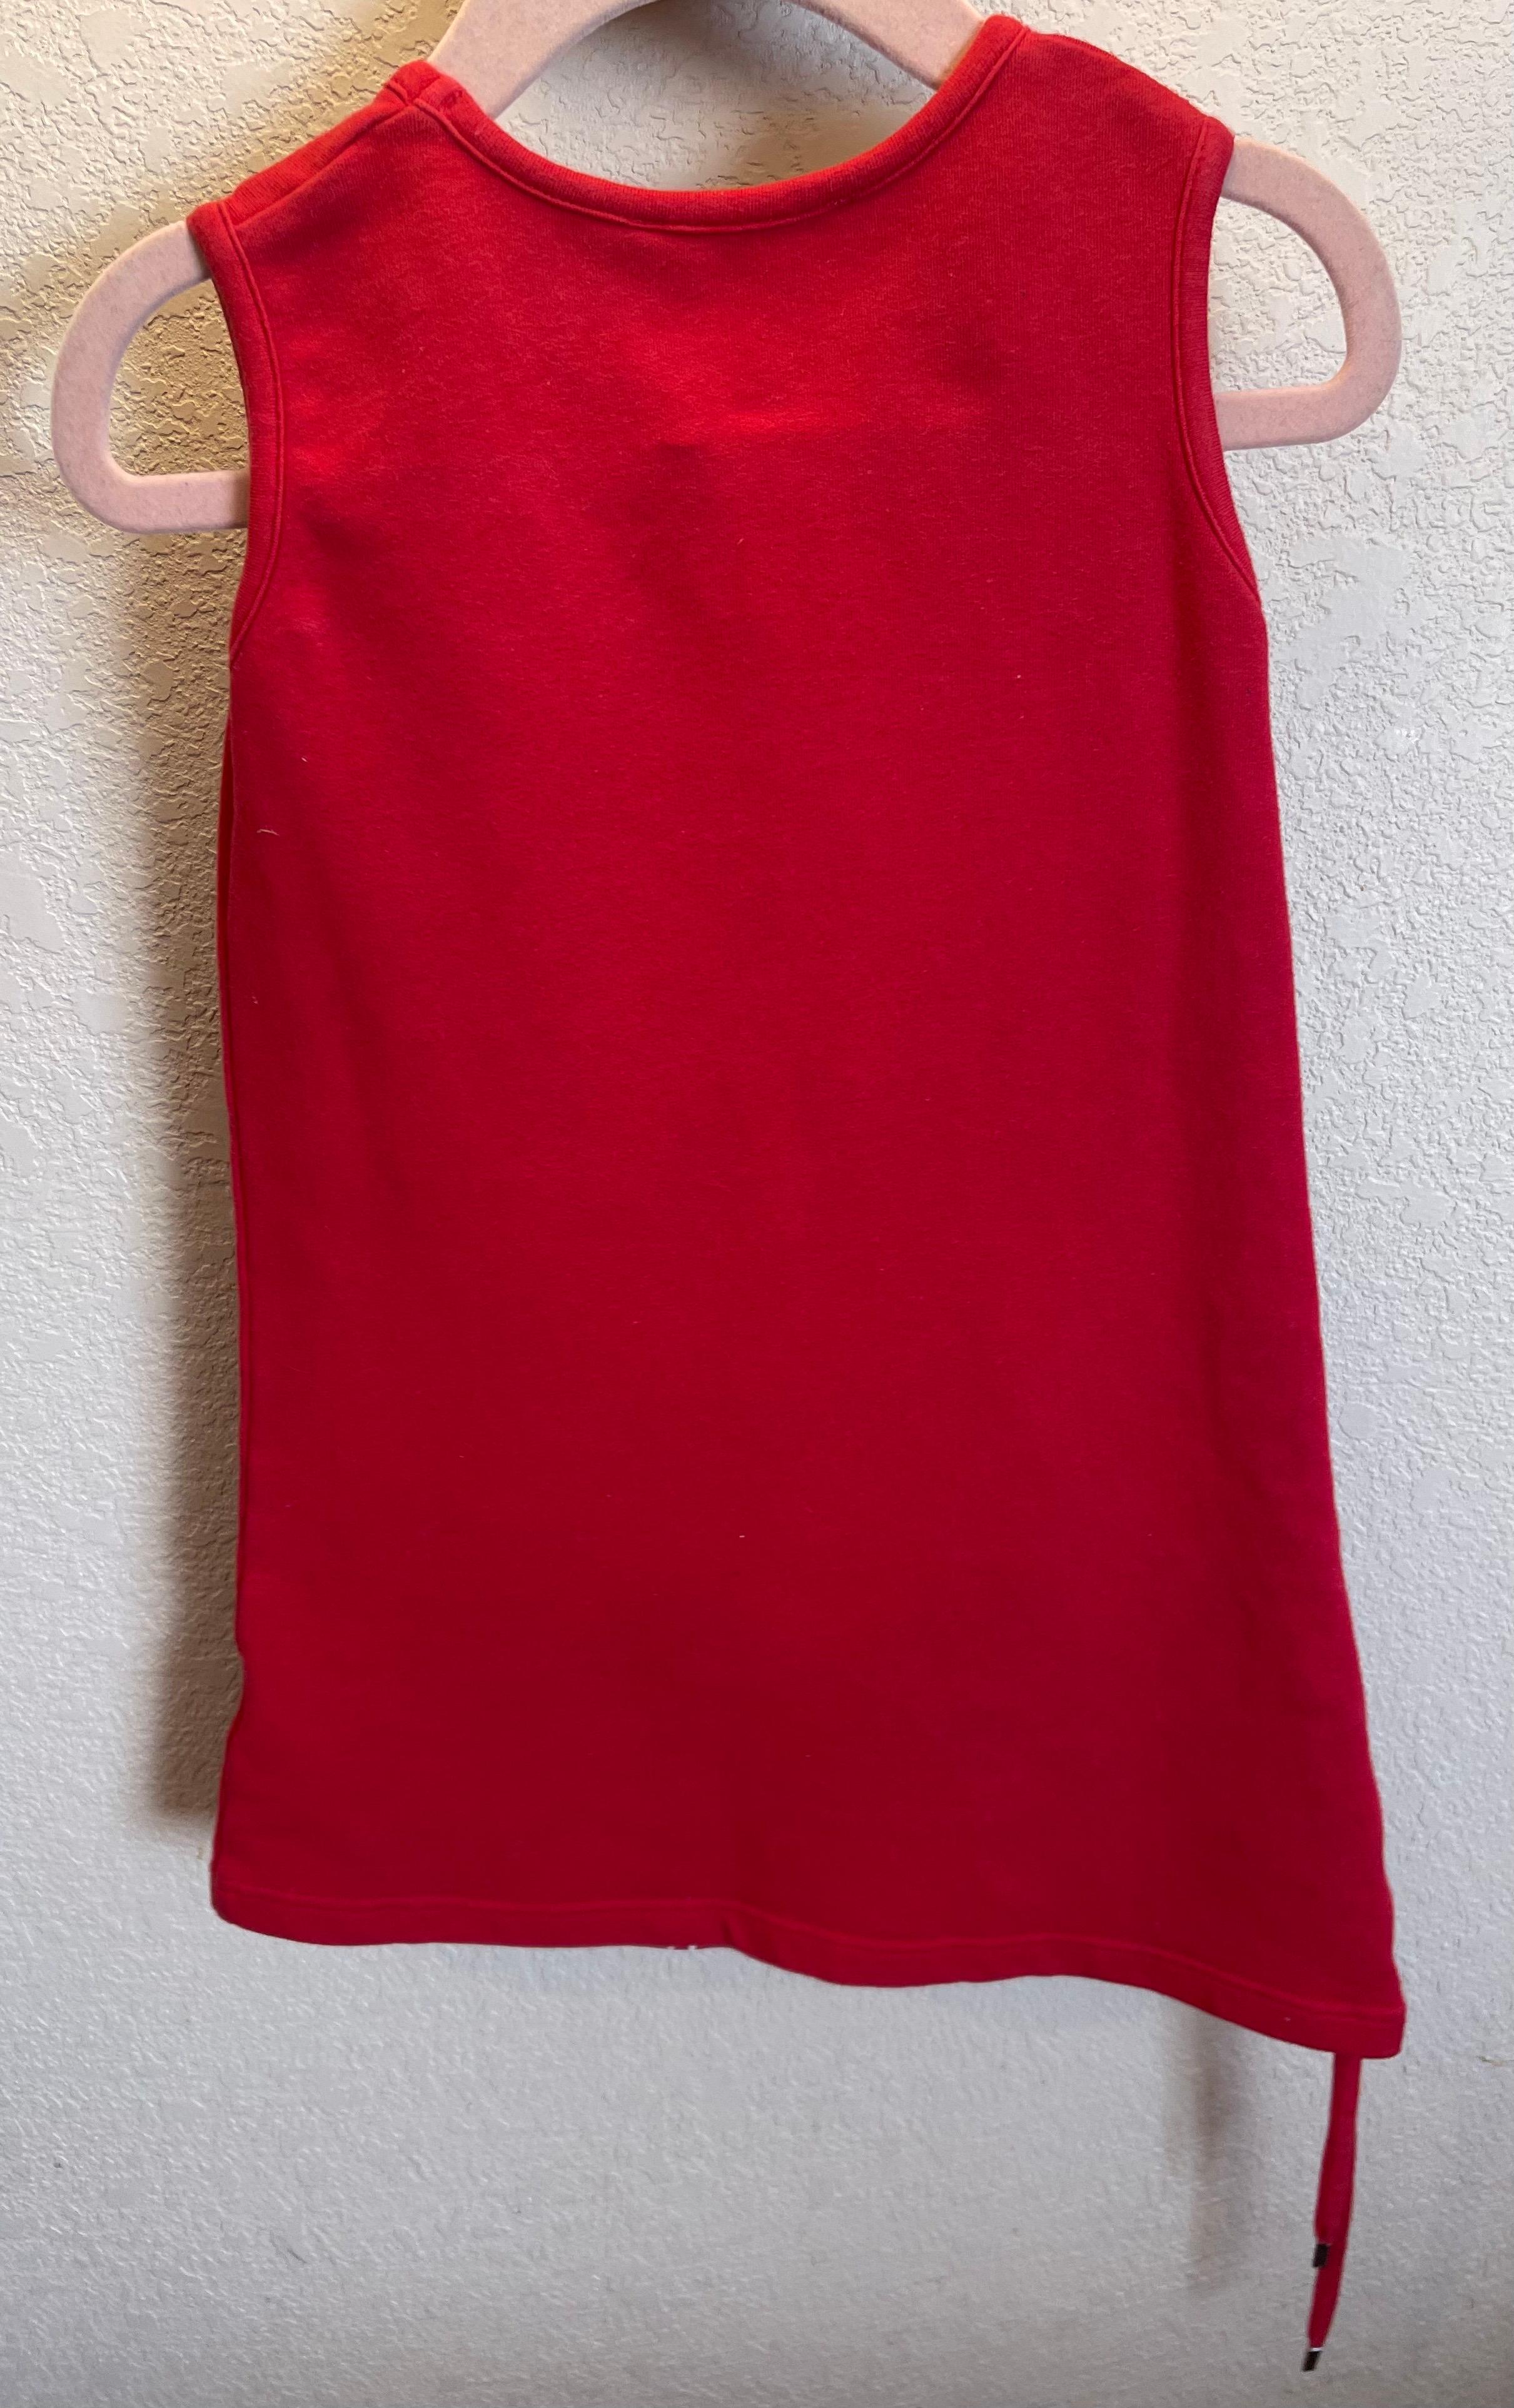 Very rare and chic Christian Dior girl's (kid's) dress with 